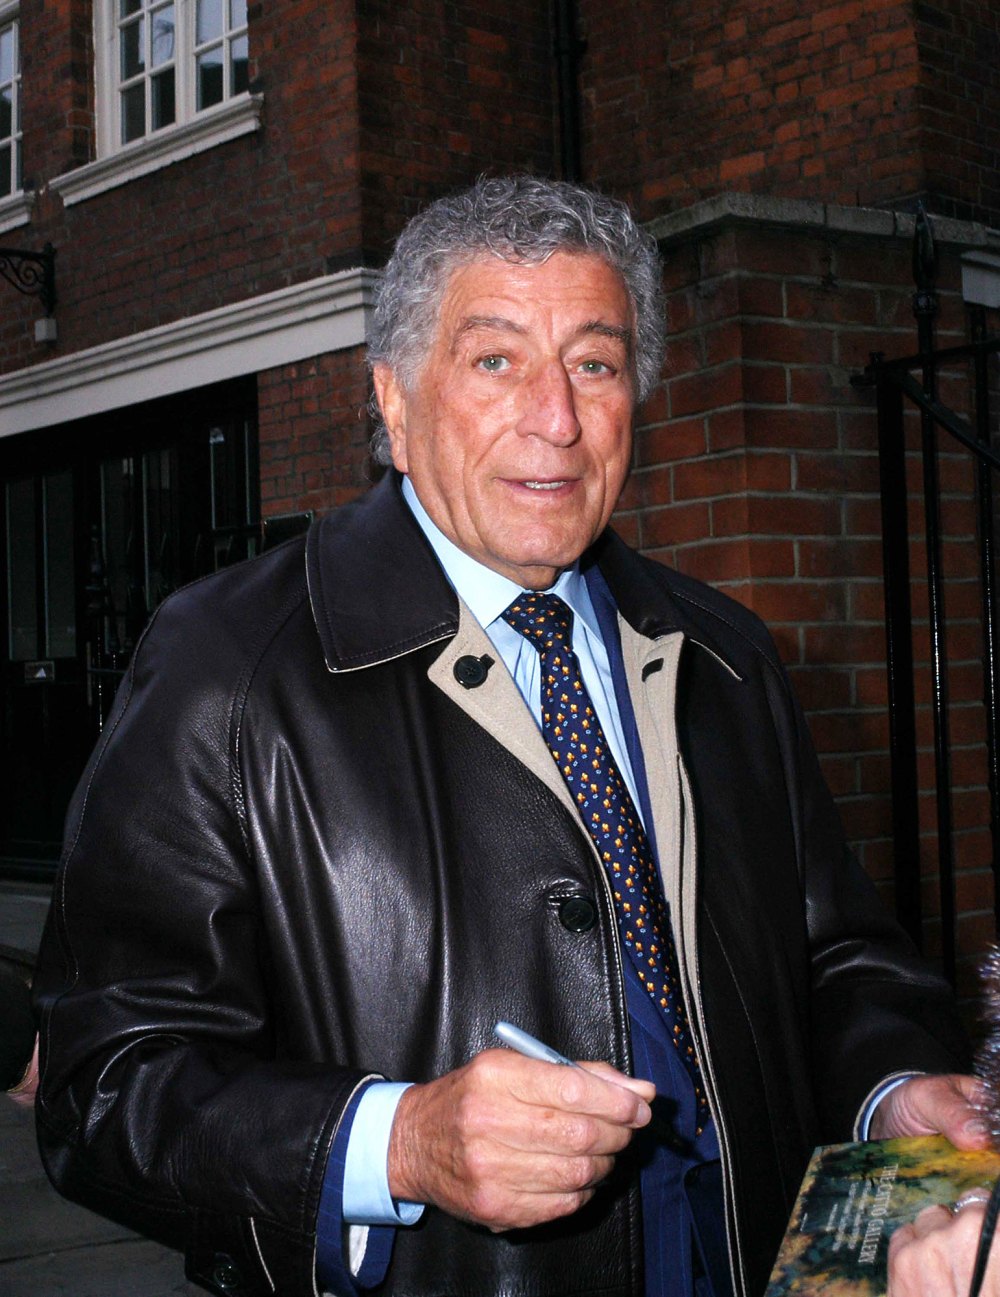 Tony Bennett Apologizes for Controversial 9/11 Comments